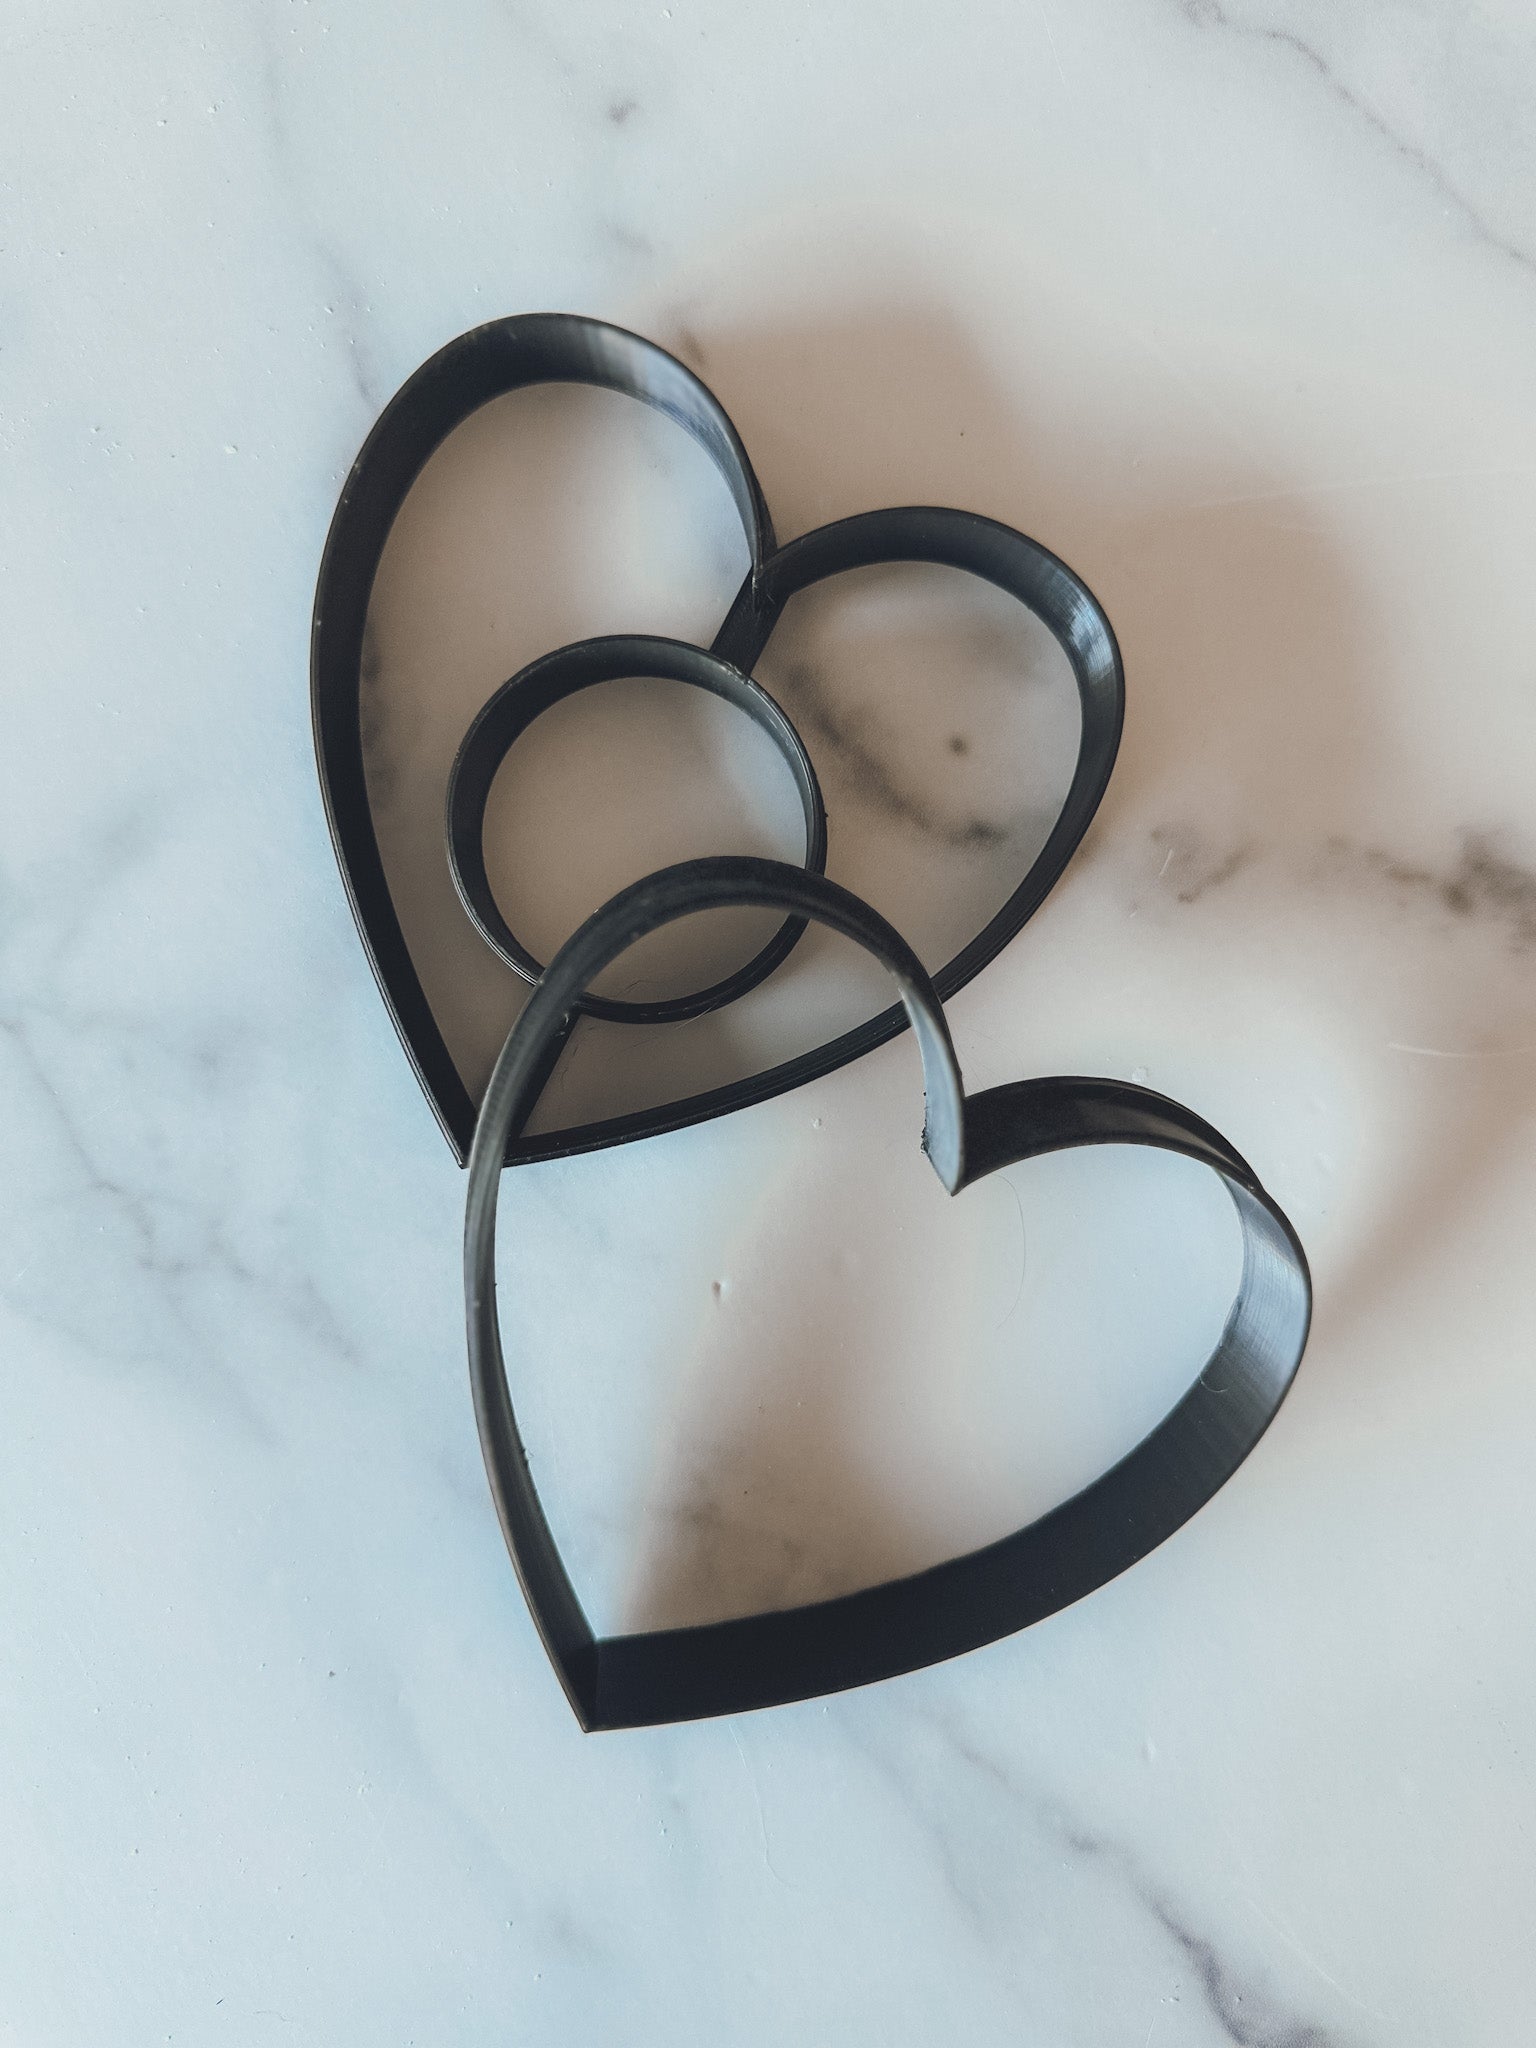 Byo Stack and Break Heart Cookie Cutter Set of 2